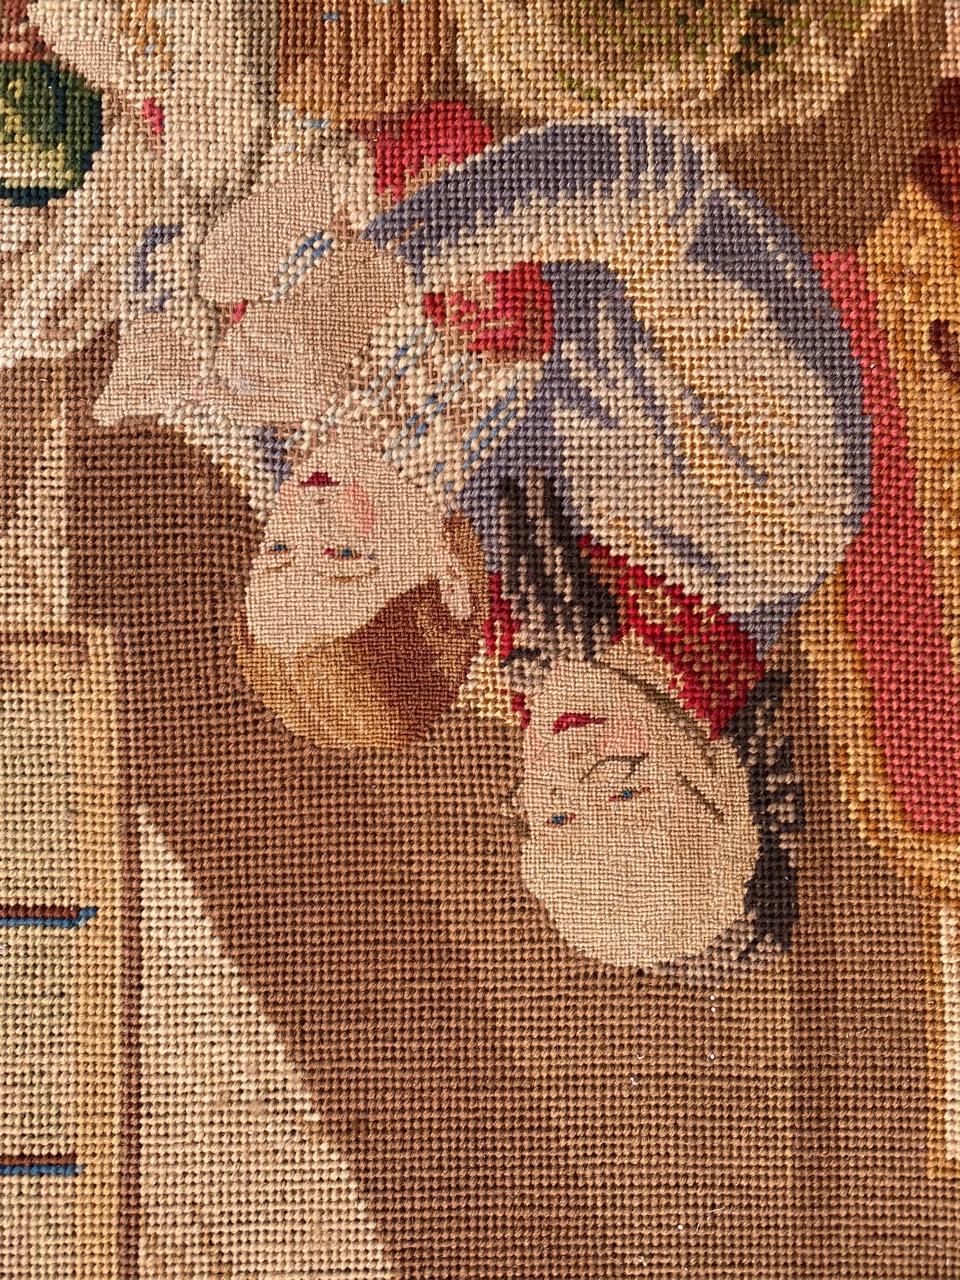 Very beautiful late 19th century needlepoint tapestry with beautiful design of a scene of an elderly lady teaching a young girl to sew, and with beautiful natural colors, entirely and finely hand embroidered with needlepoint method with wool and